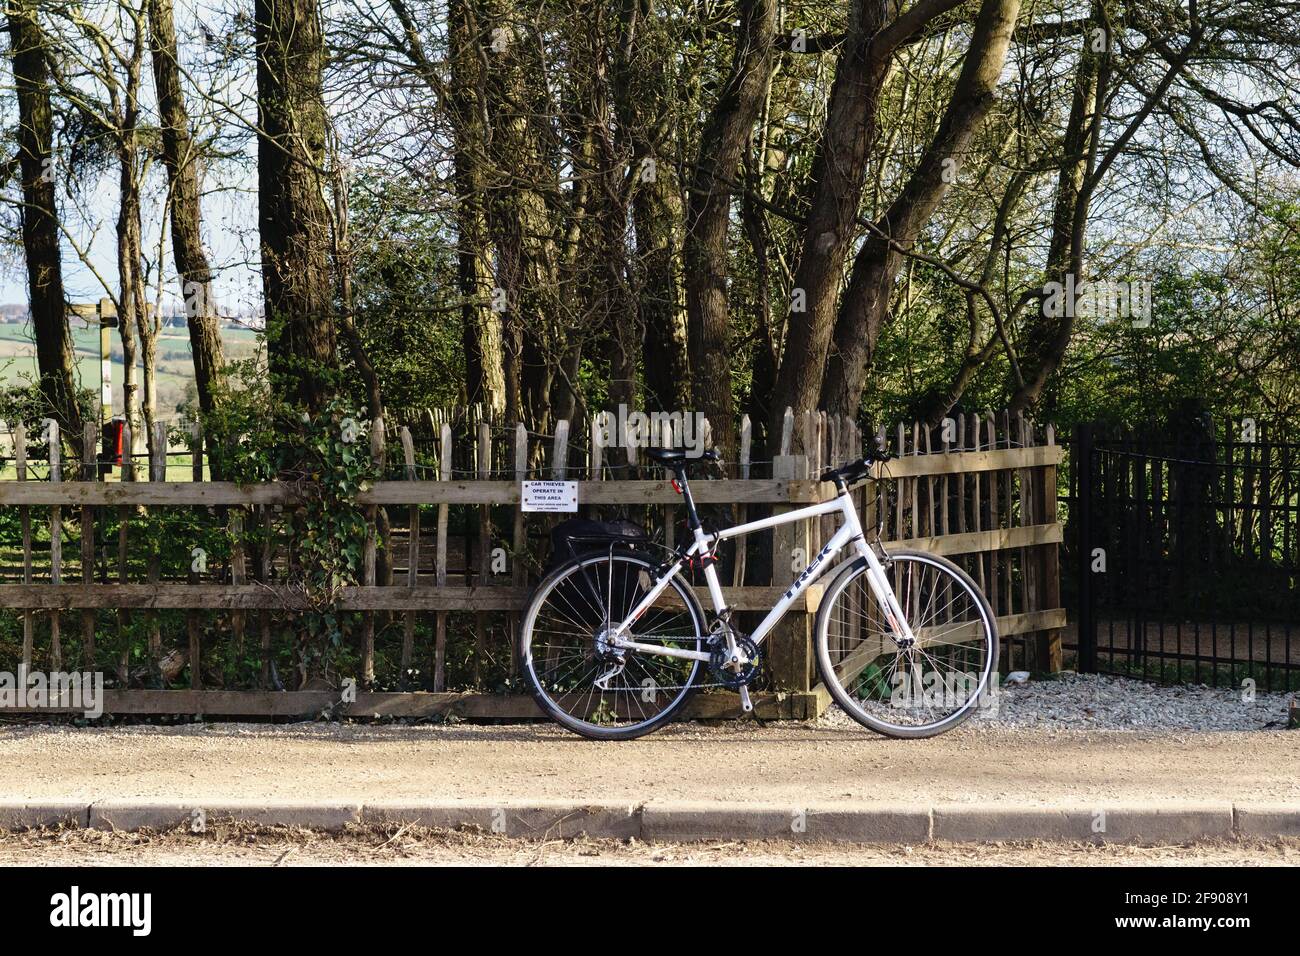 A white bike chained to a wooden fence, next to a sign that says 'Car thieves operate here'. UK countryside setting. Stock Photo